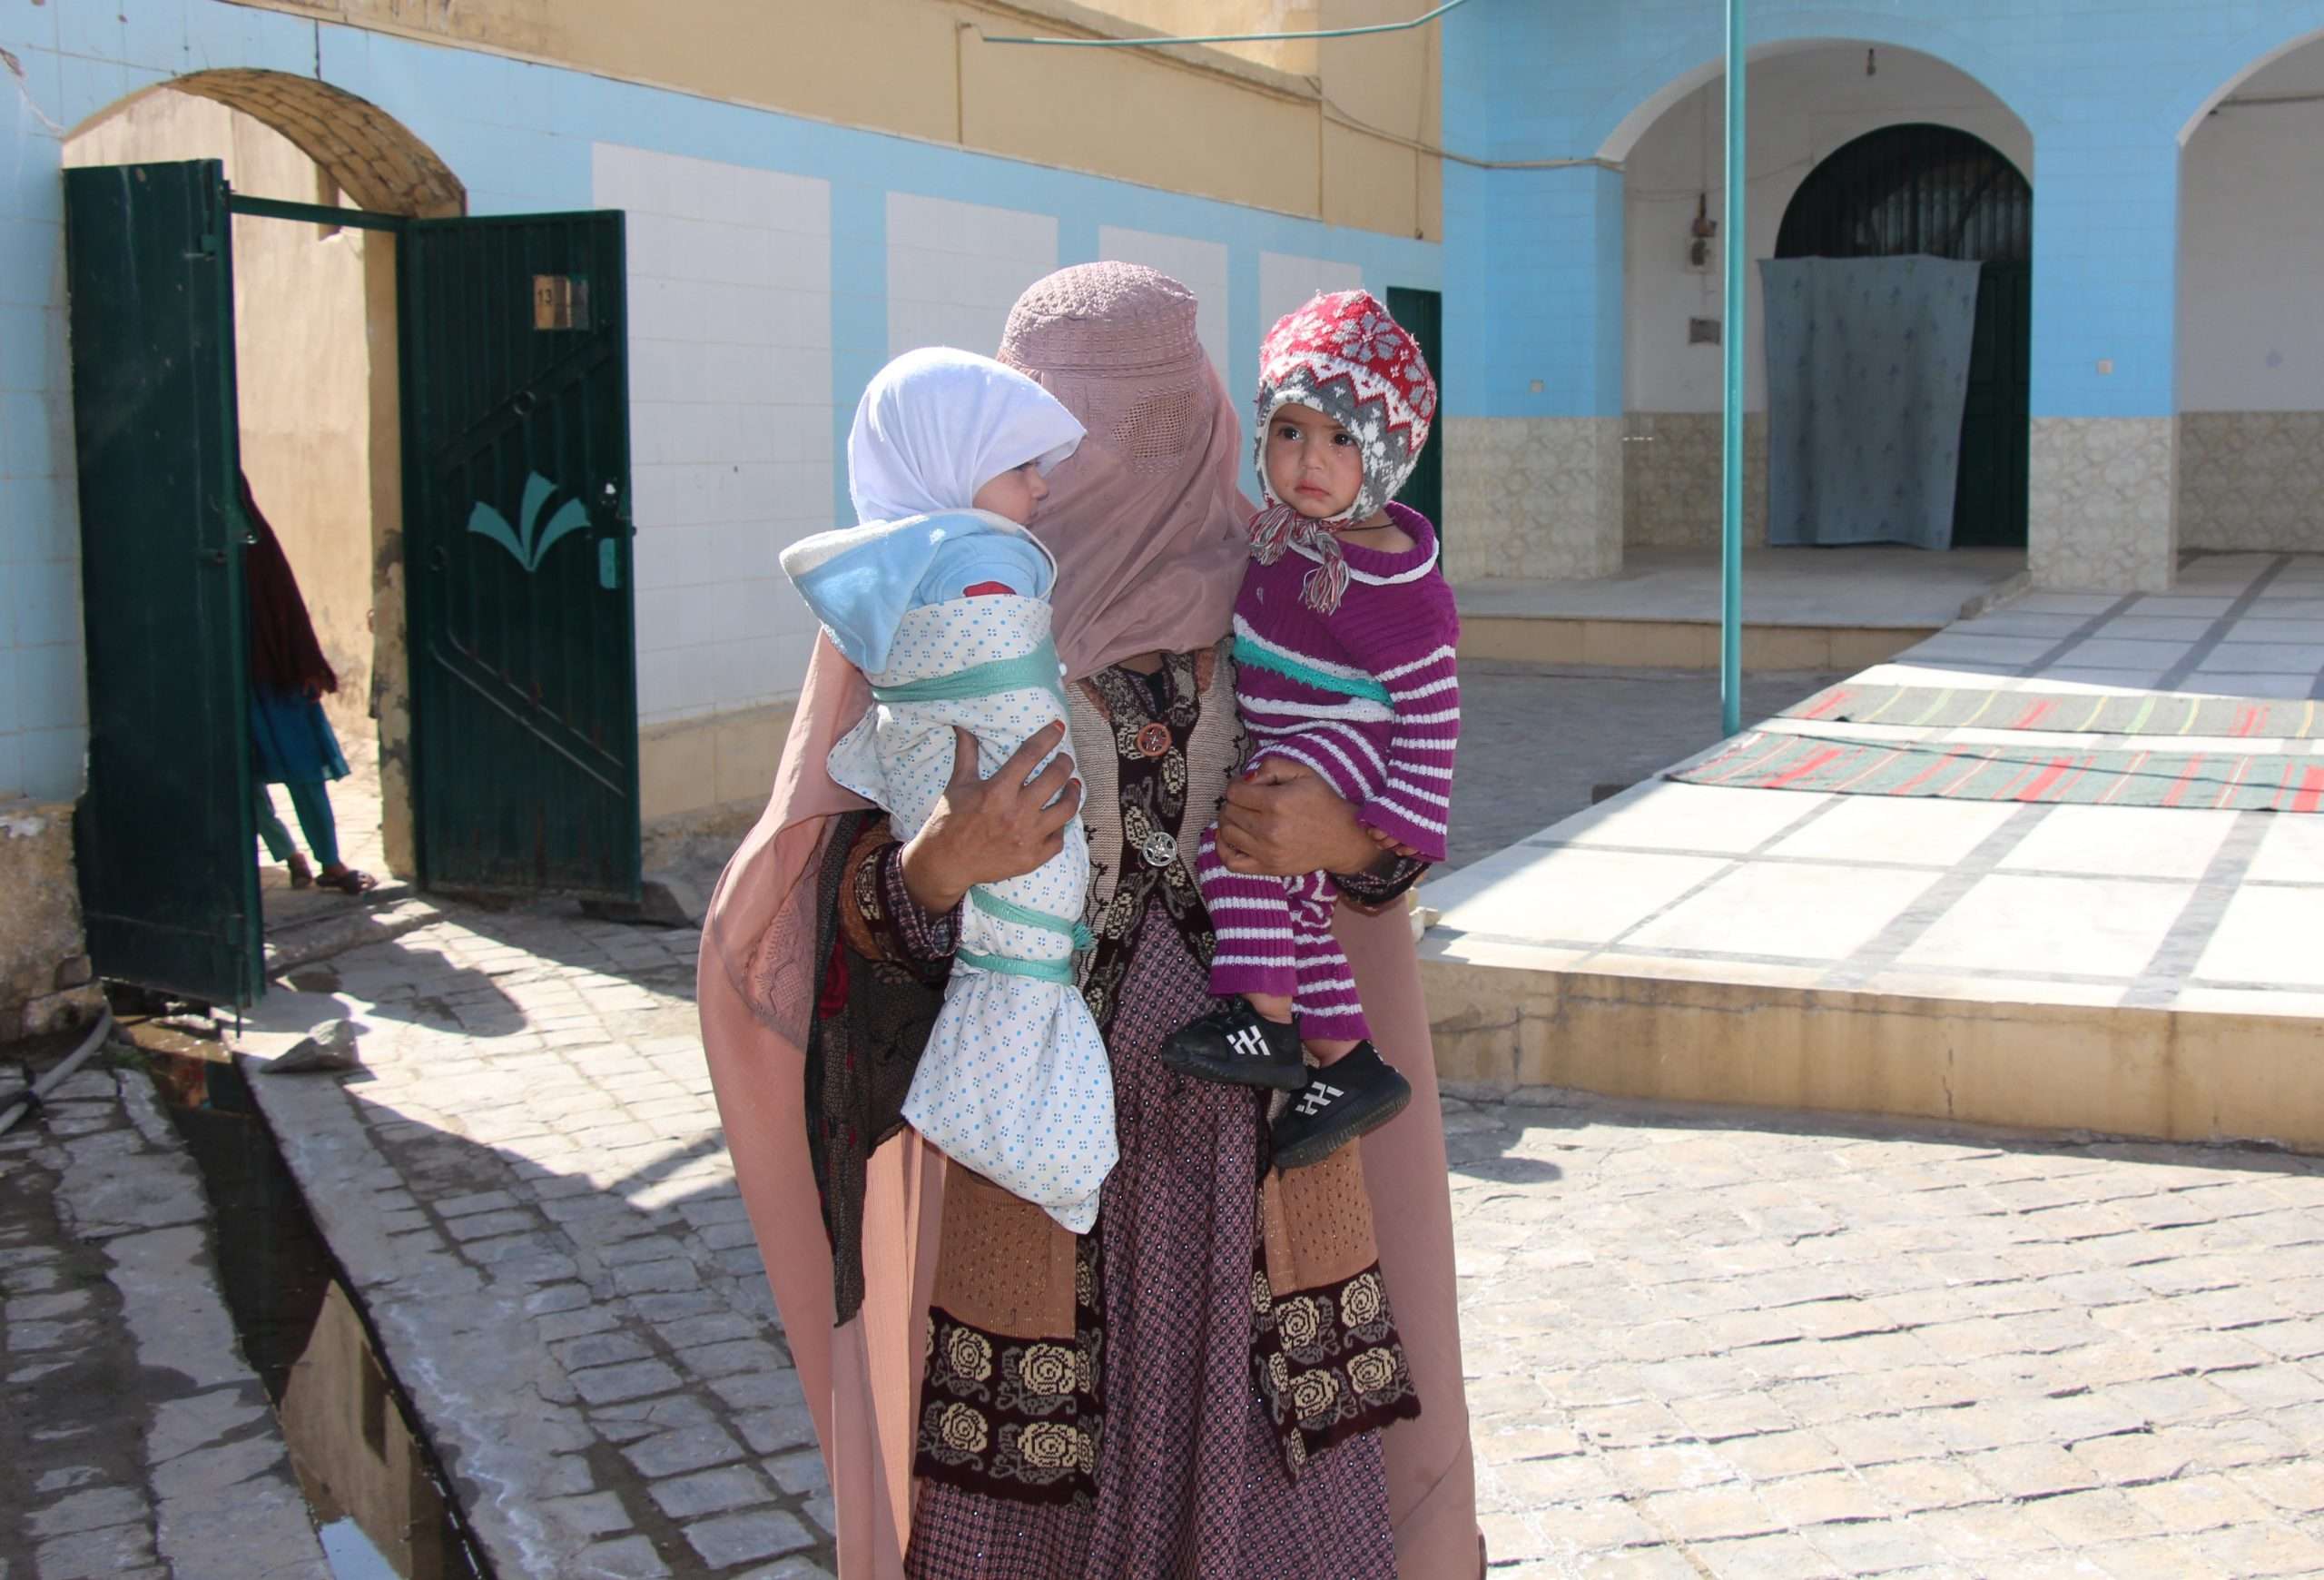 Subhania, a social mobilizer based in Kandahar city, bringing two children for vaccination at Haqani mosque in Manzal Bagh subdistrict. © UNICEF Afghanistan/2021/Hamdard